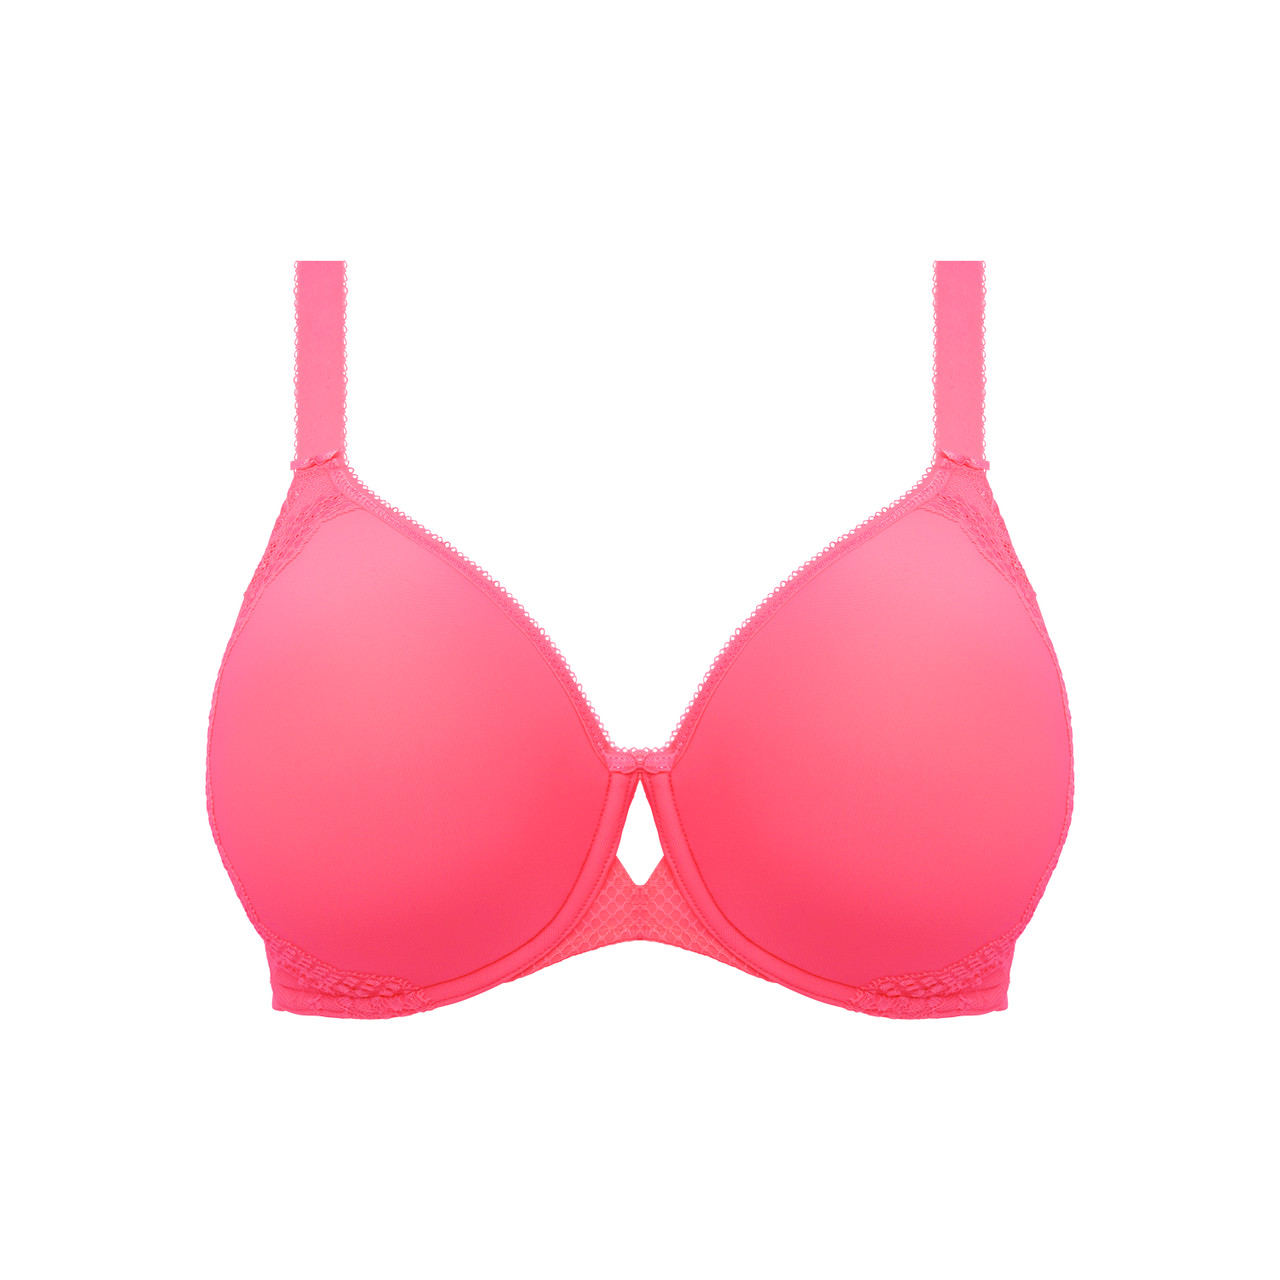 Elomi Charley Underwire Bandless Spacer Bra in Honeysuckle FINAL SALE (40%  Off) - Busted Bra Shop